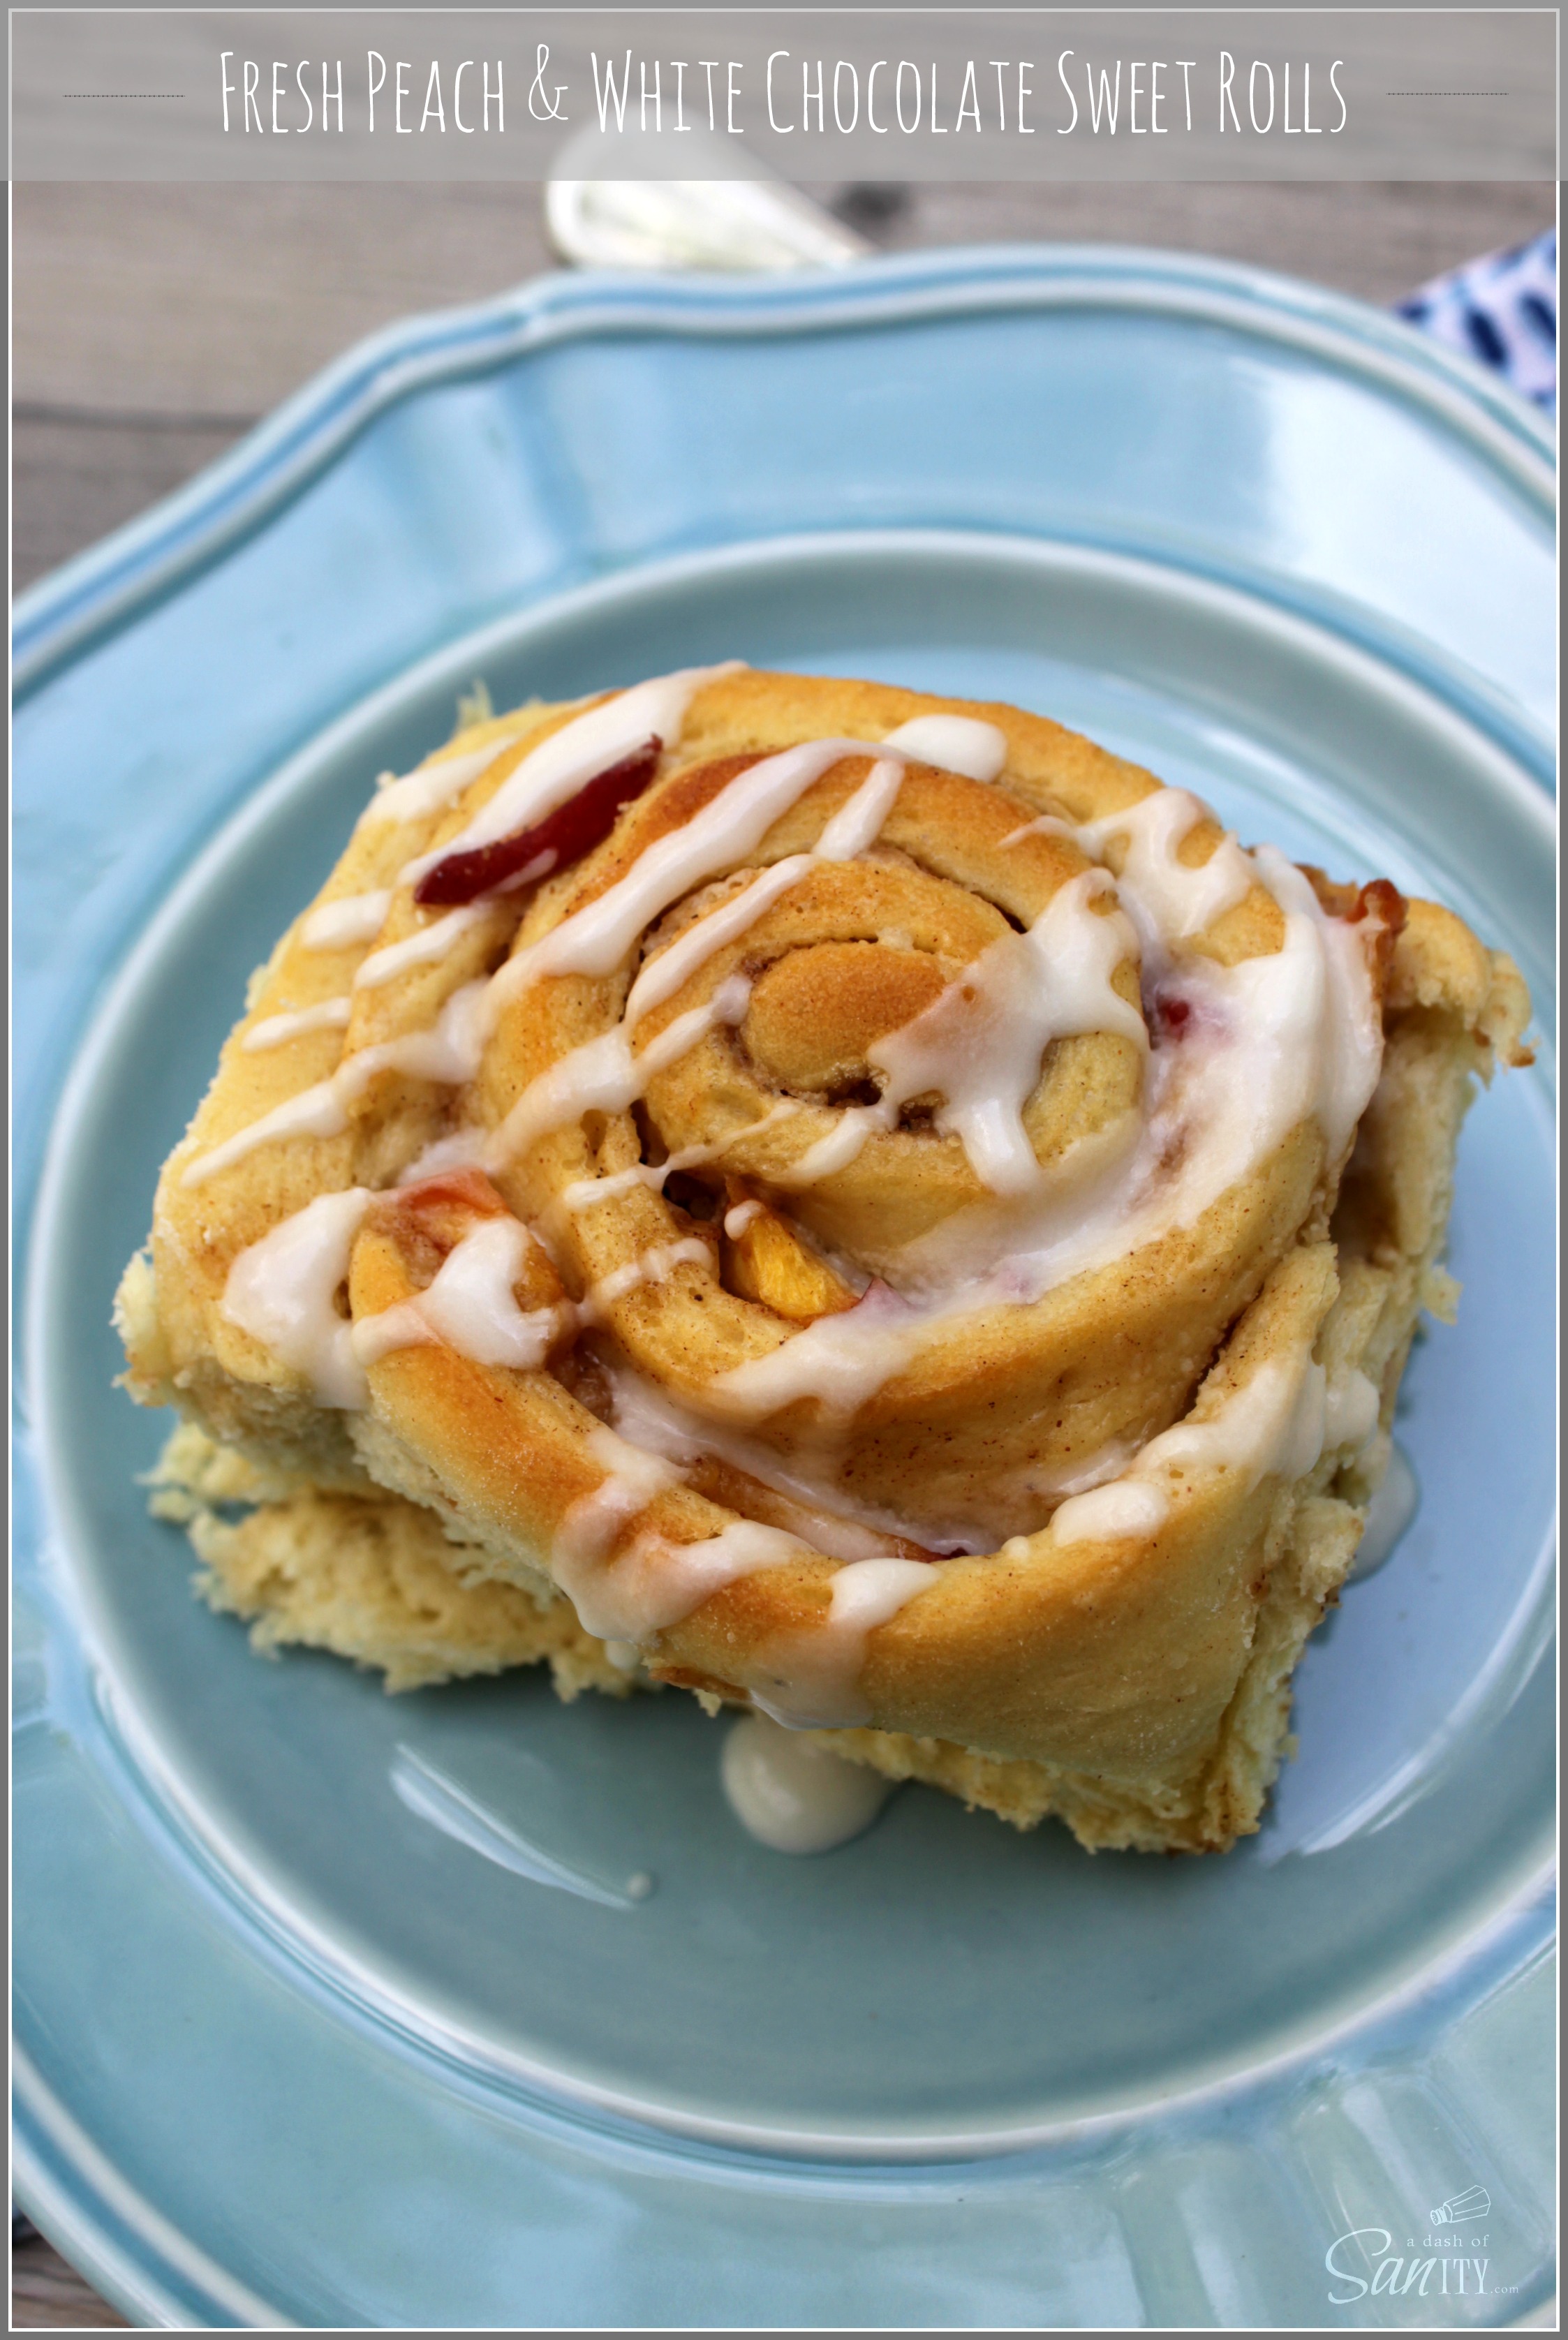 Delicious Summer Recipes : Fresh Peach and White Chocolate Sweet Rolls